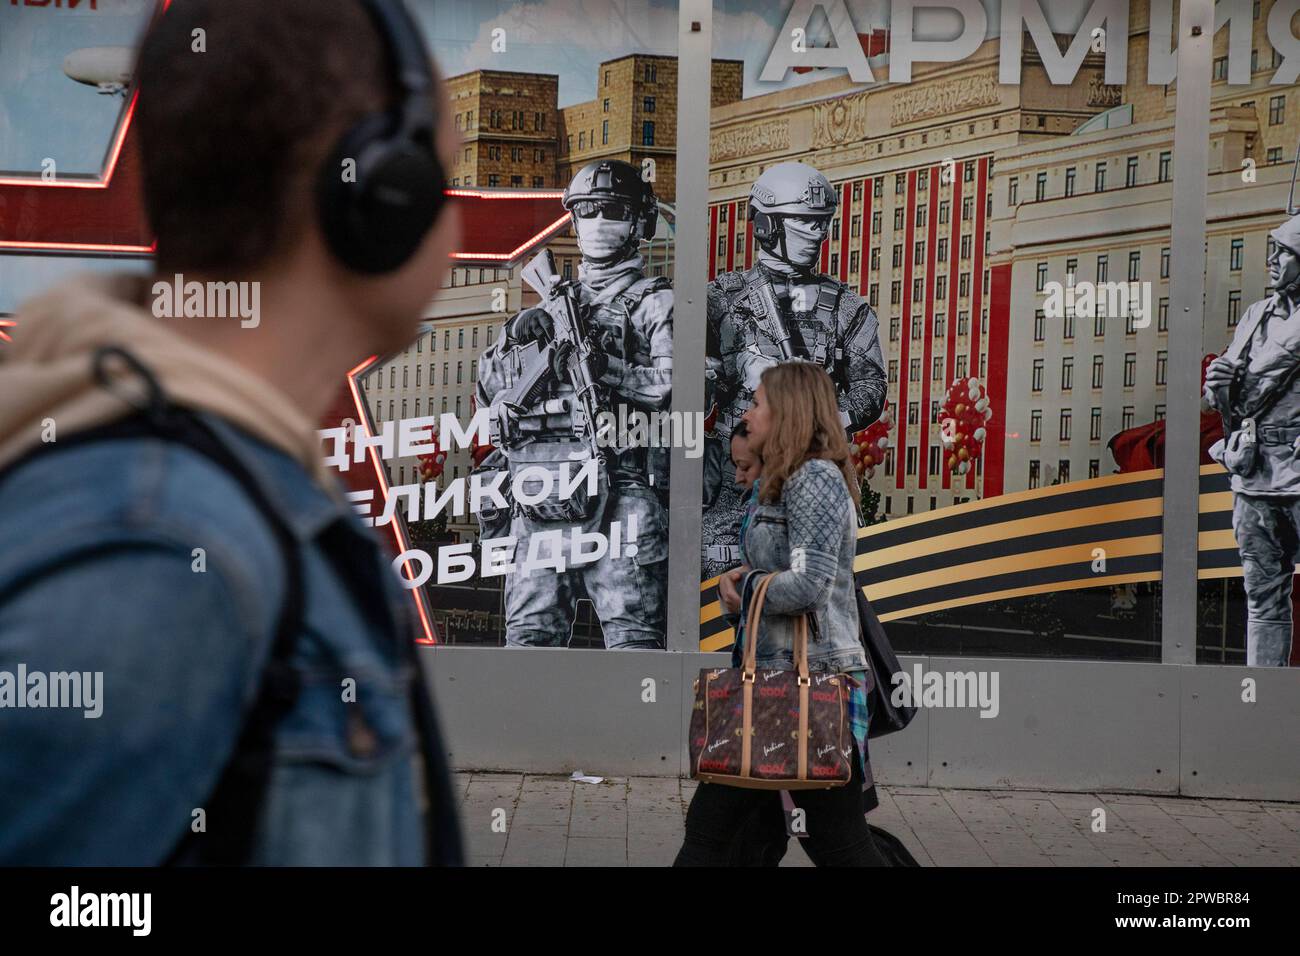 Moscow, Russia. 29th of April, 2023 People walk past the Army of Russia store with a festive banner for Victory Day celebration in the shop window in central Moscow, Russia. The banner reads 'Army of Russia!' Stock Photo